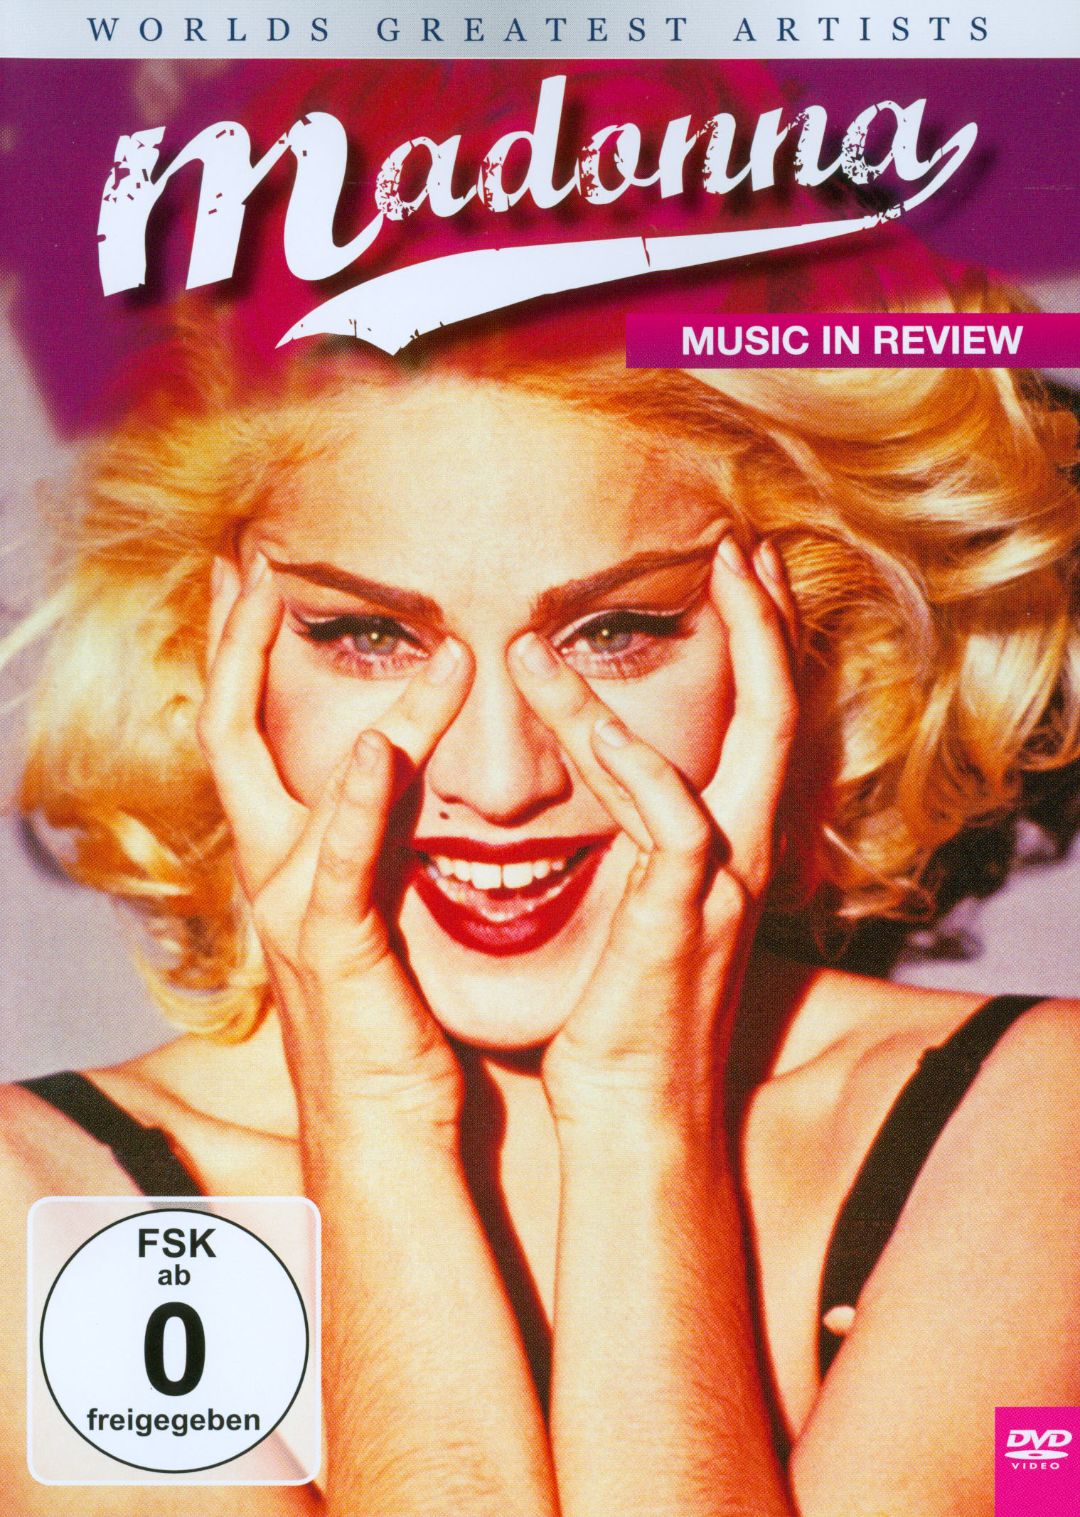 Best Buy: Madonna: World's Greatest Artists Music in Review [DVD ...